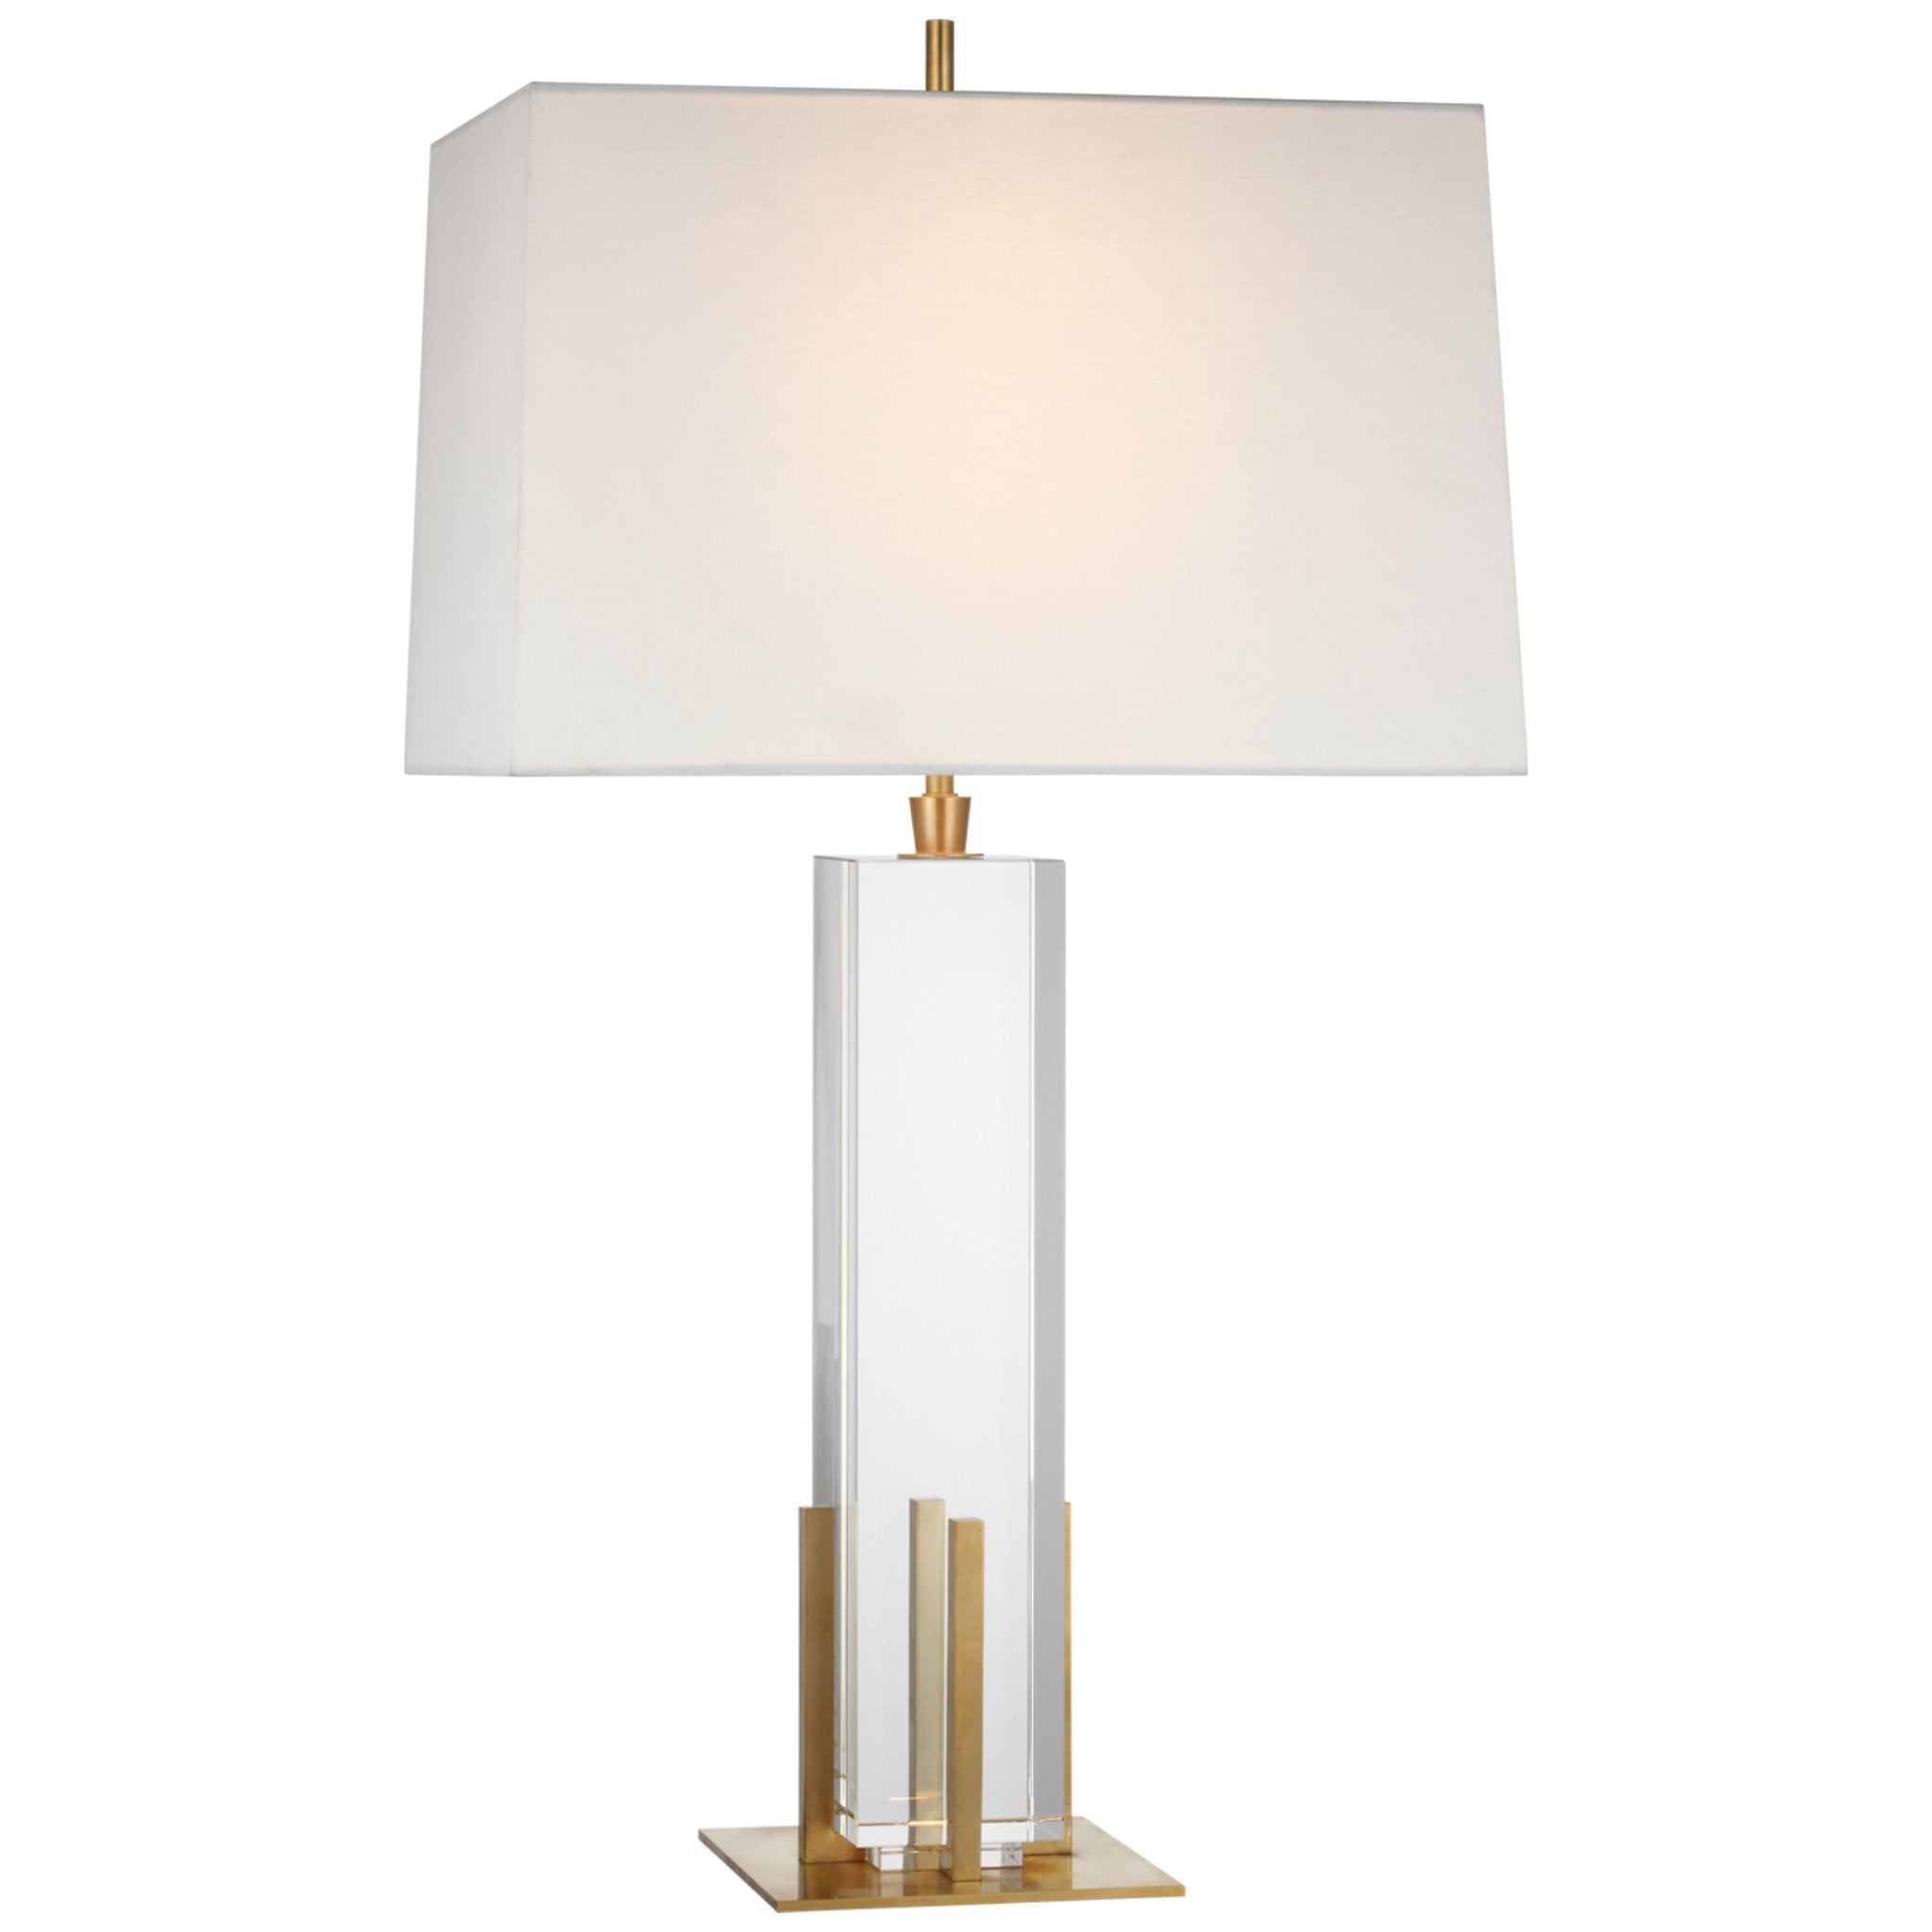 Thomas O'Brien Gironde Large Table Lamp in Crystal and Hand-Rubbed Antique Brass with Linen Shade